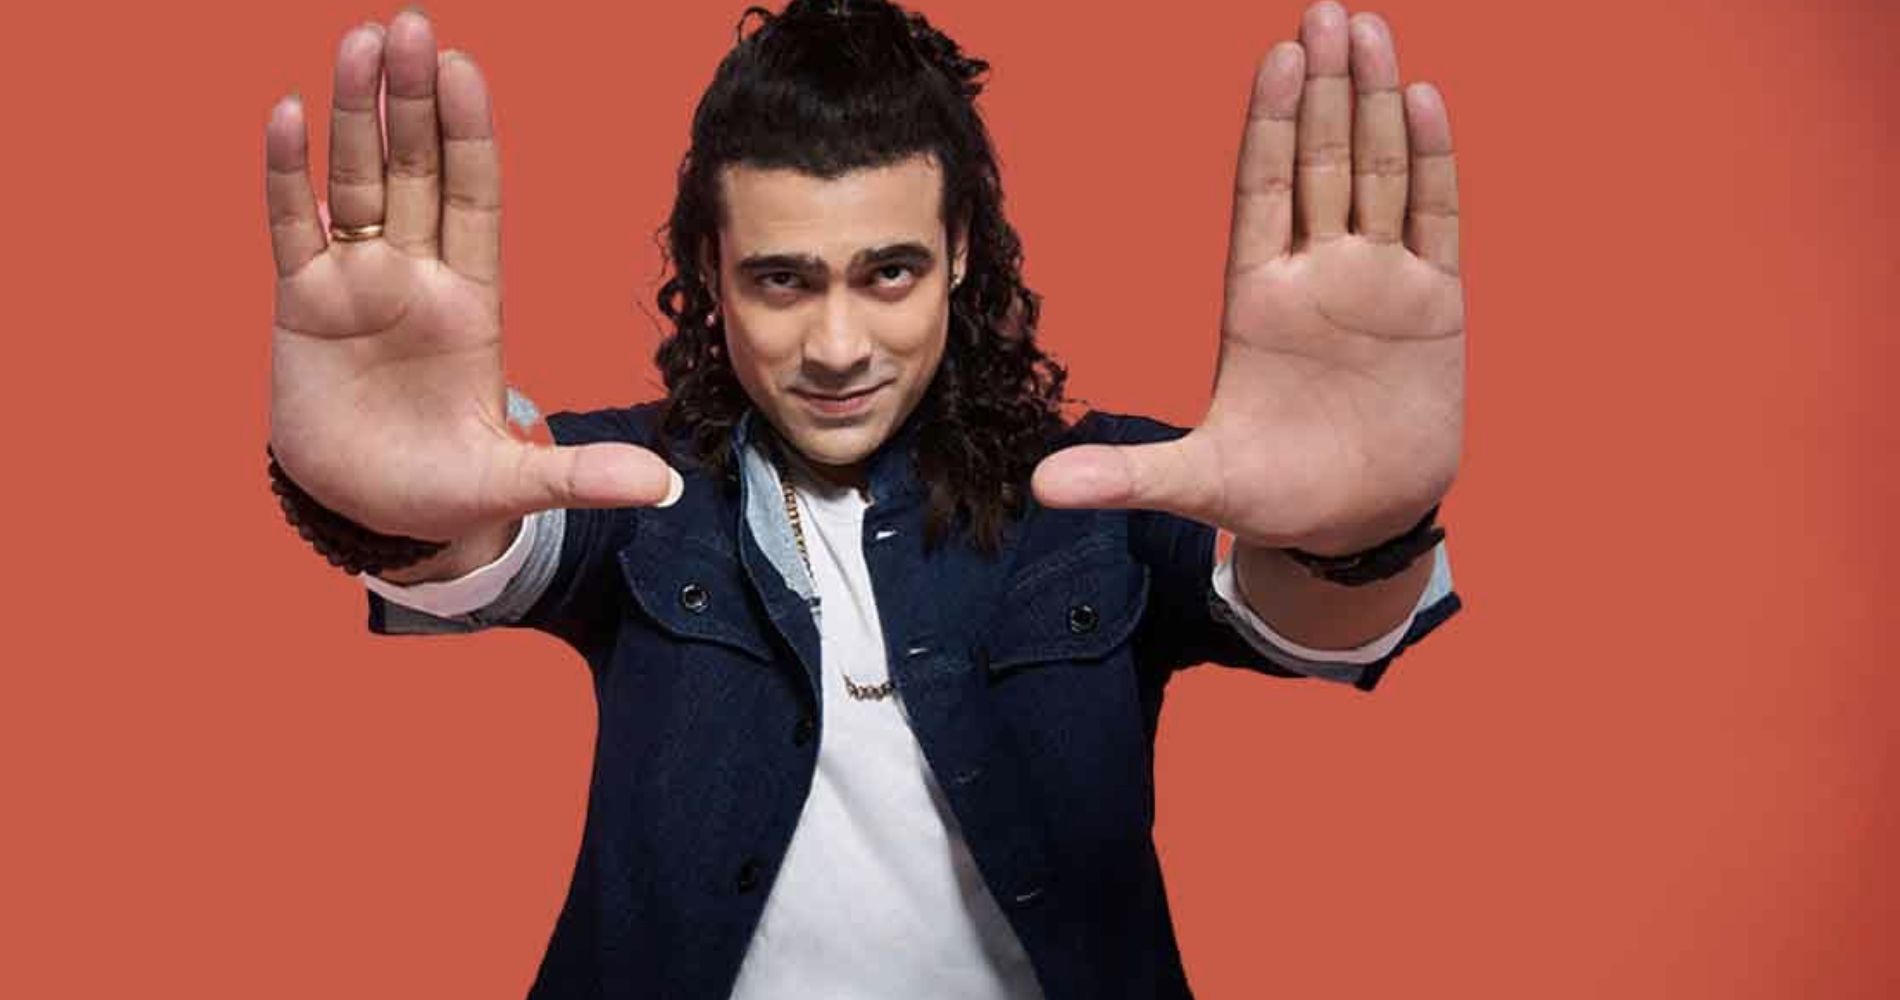 Jubin Nautiyal Steps Into The Hindi Pop Genre With A Distinctive Co-Composition In 'Hai Kaisi Kaisi'